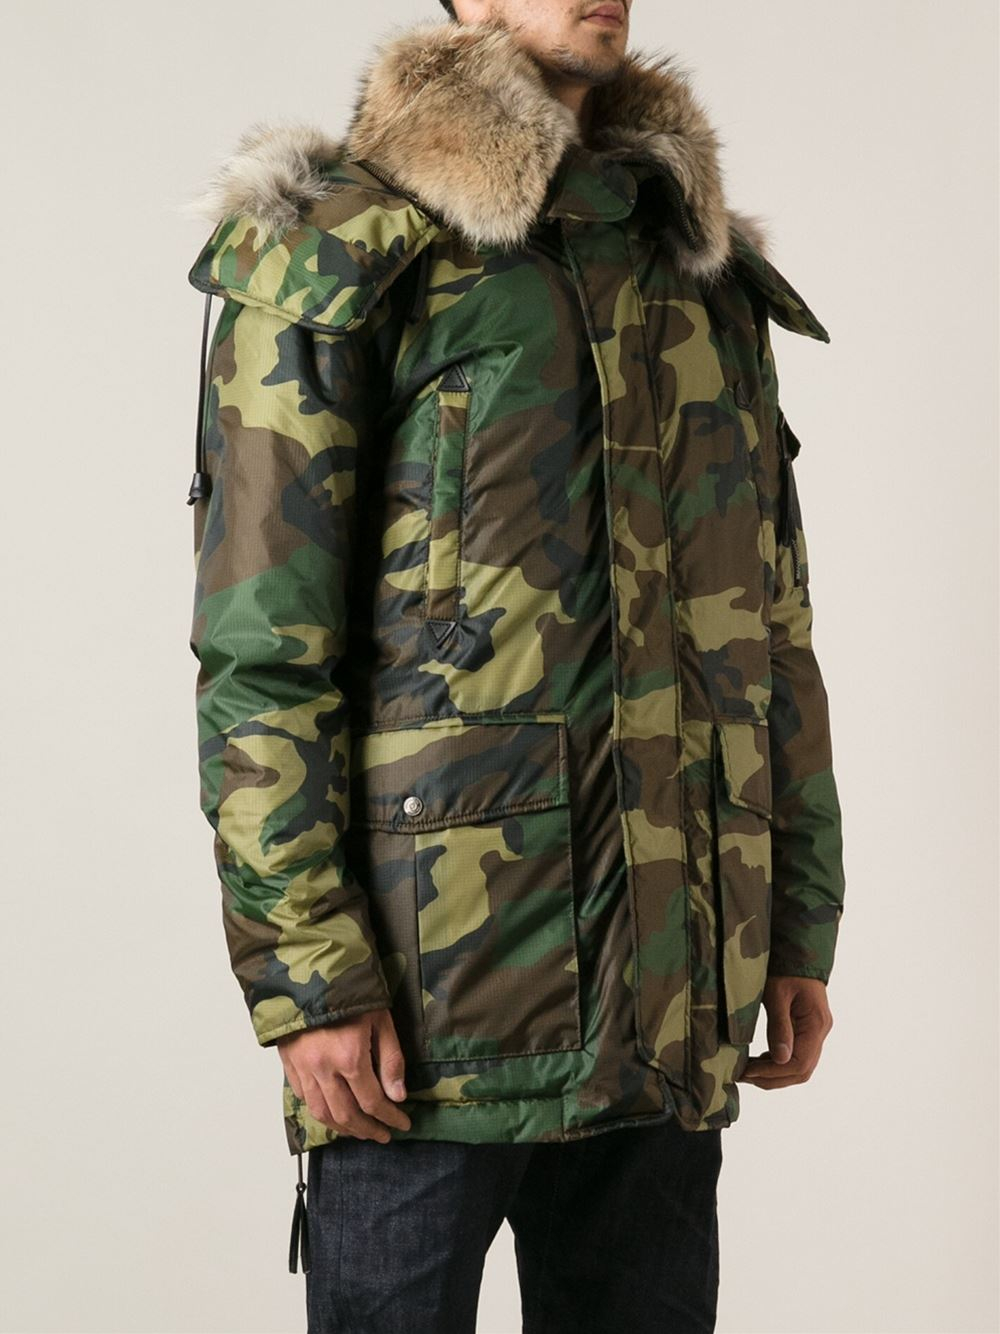 DSquared² Camouflage Parka in Green for Men | Lyst